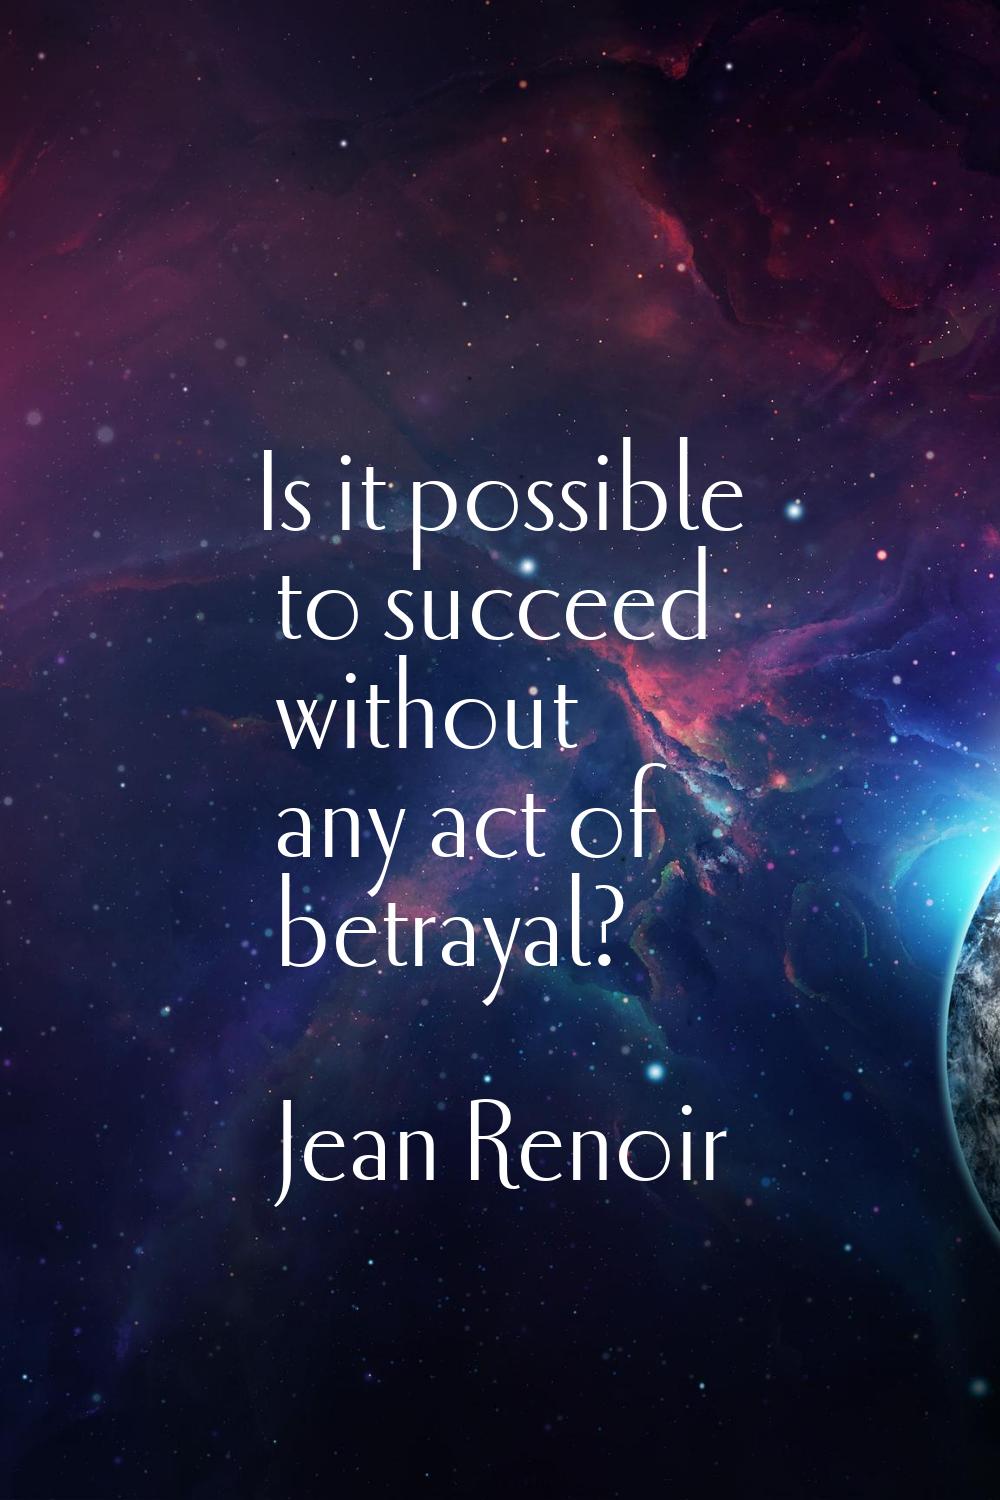 Is it possible to succeed without any act of betrayal?